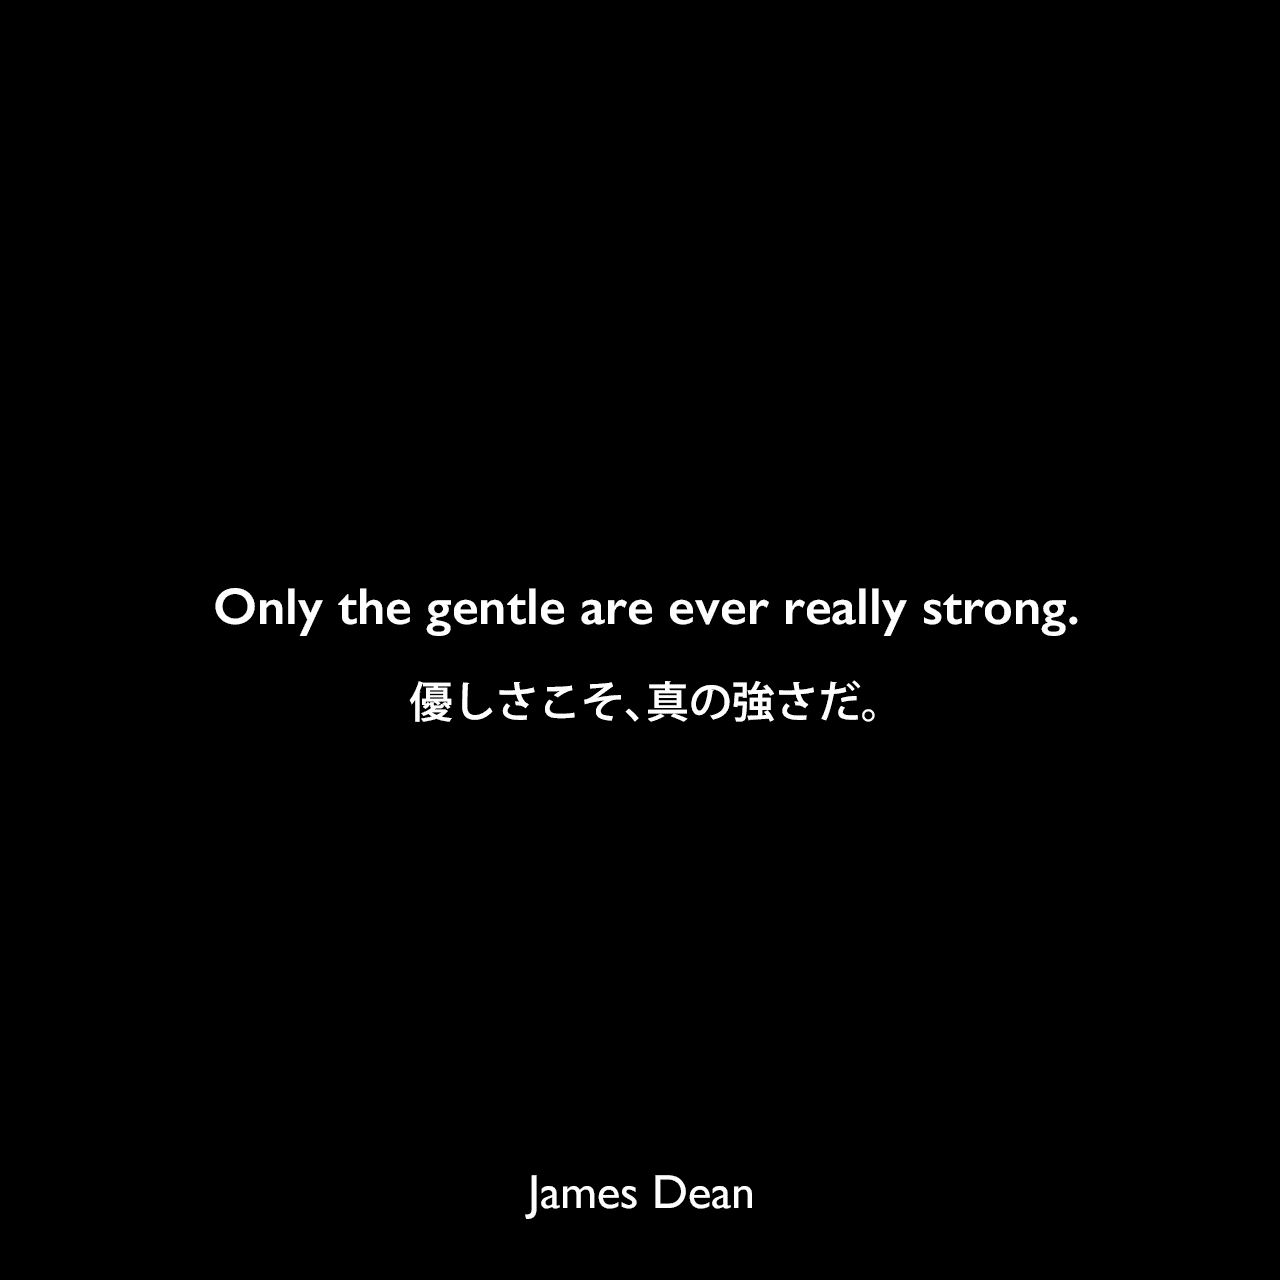 Only the gentle are ever really strong.優しさこそ、真の強さだ。